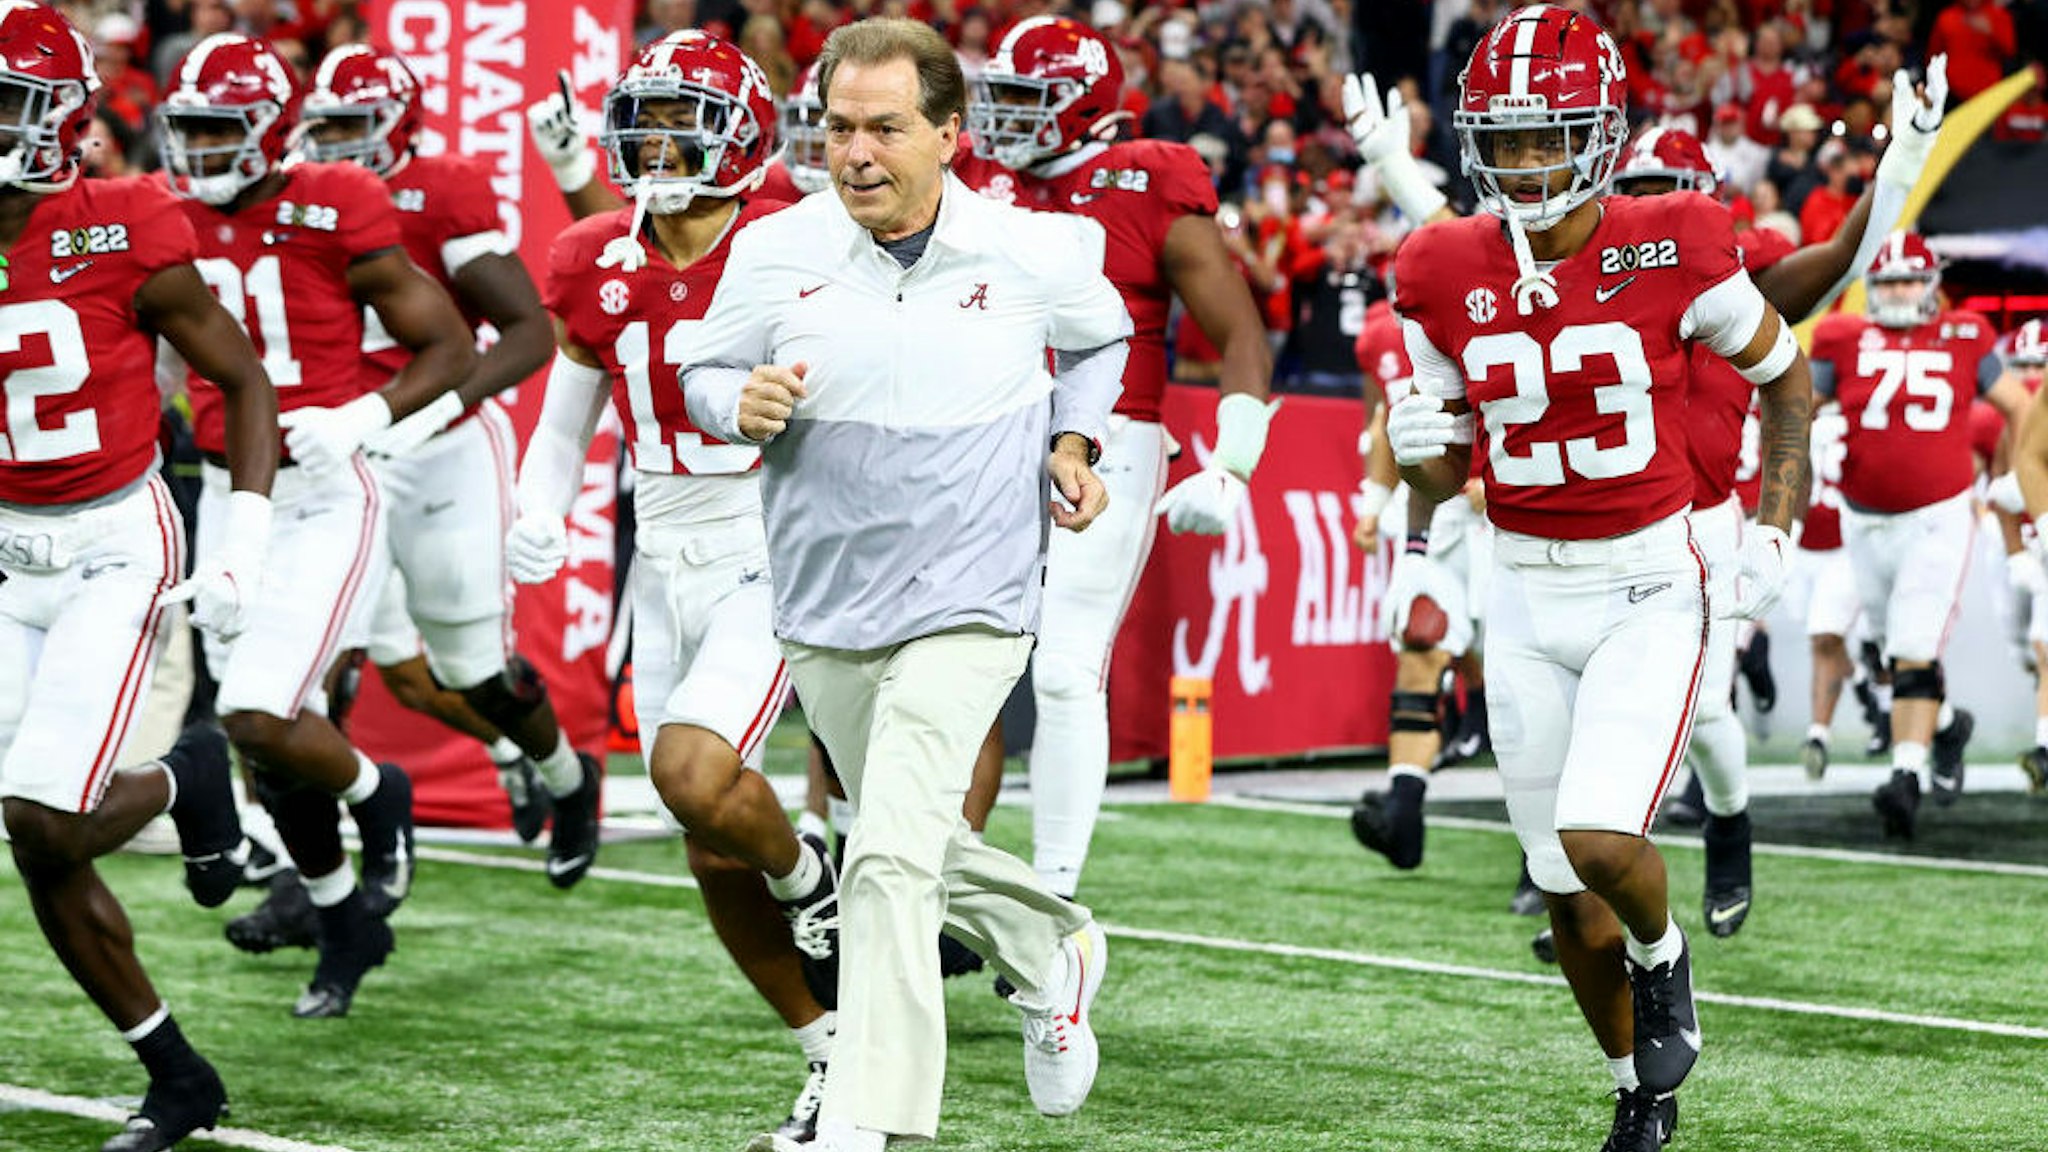 INDIANAPOLIS, IN - JANUARY 10: Head Coach Nick Saban of the Alabama Crimson Tide takes the field against the Georgia Bulldogs during the College Football Playoff Championship held at Lucas Oil Stadium on January 10, 2022 in Indianapolis, Indiana. (Photo by Jamie Schwaberow/Getty Images)